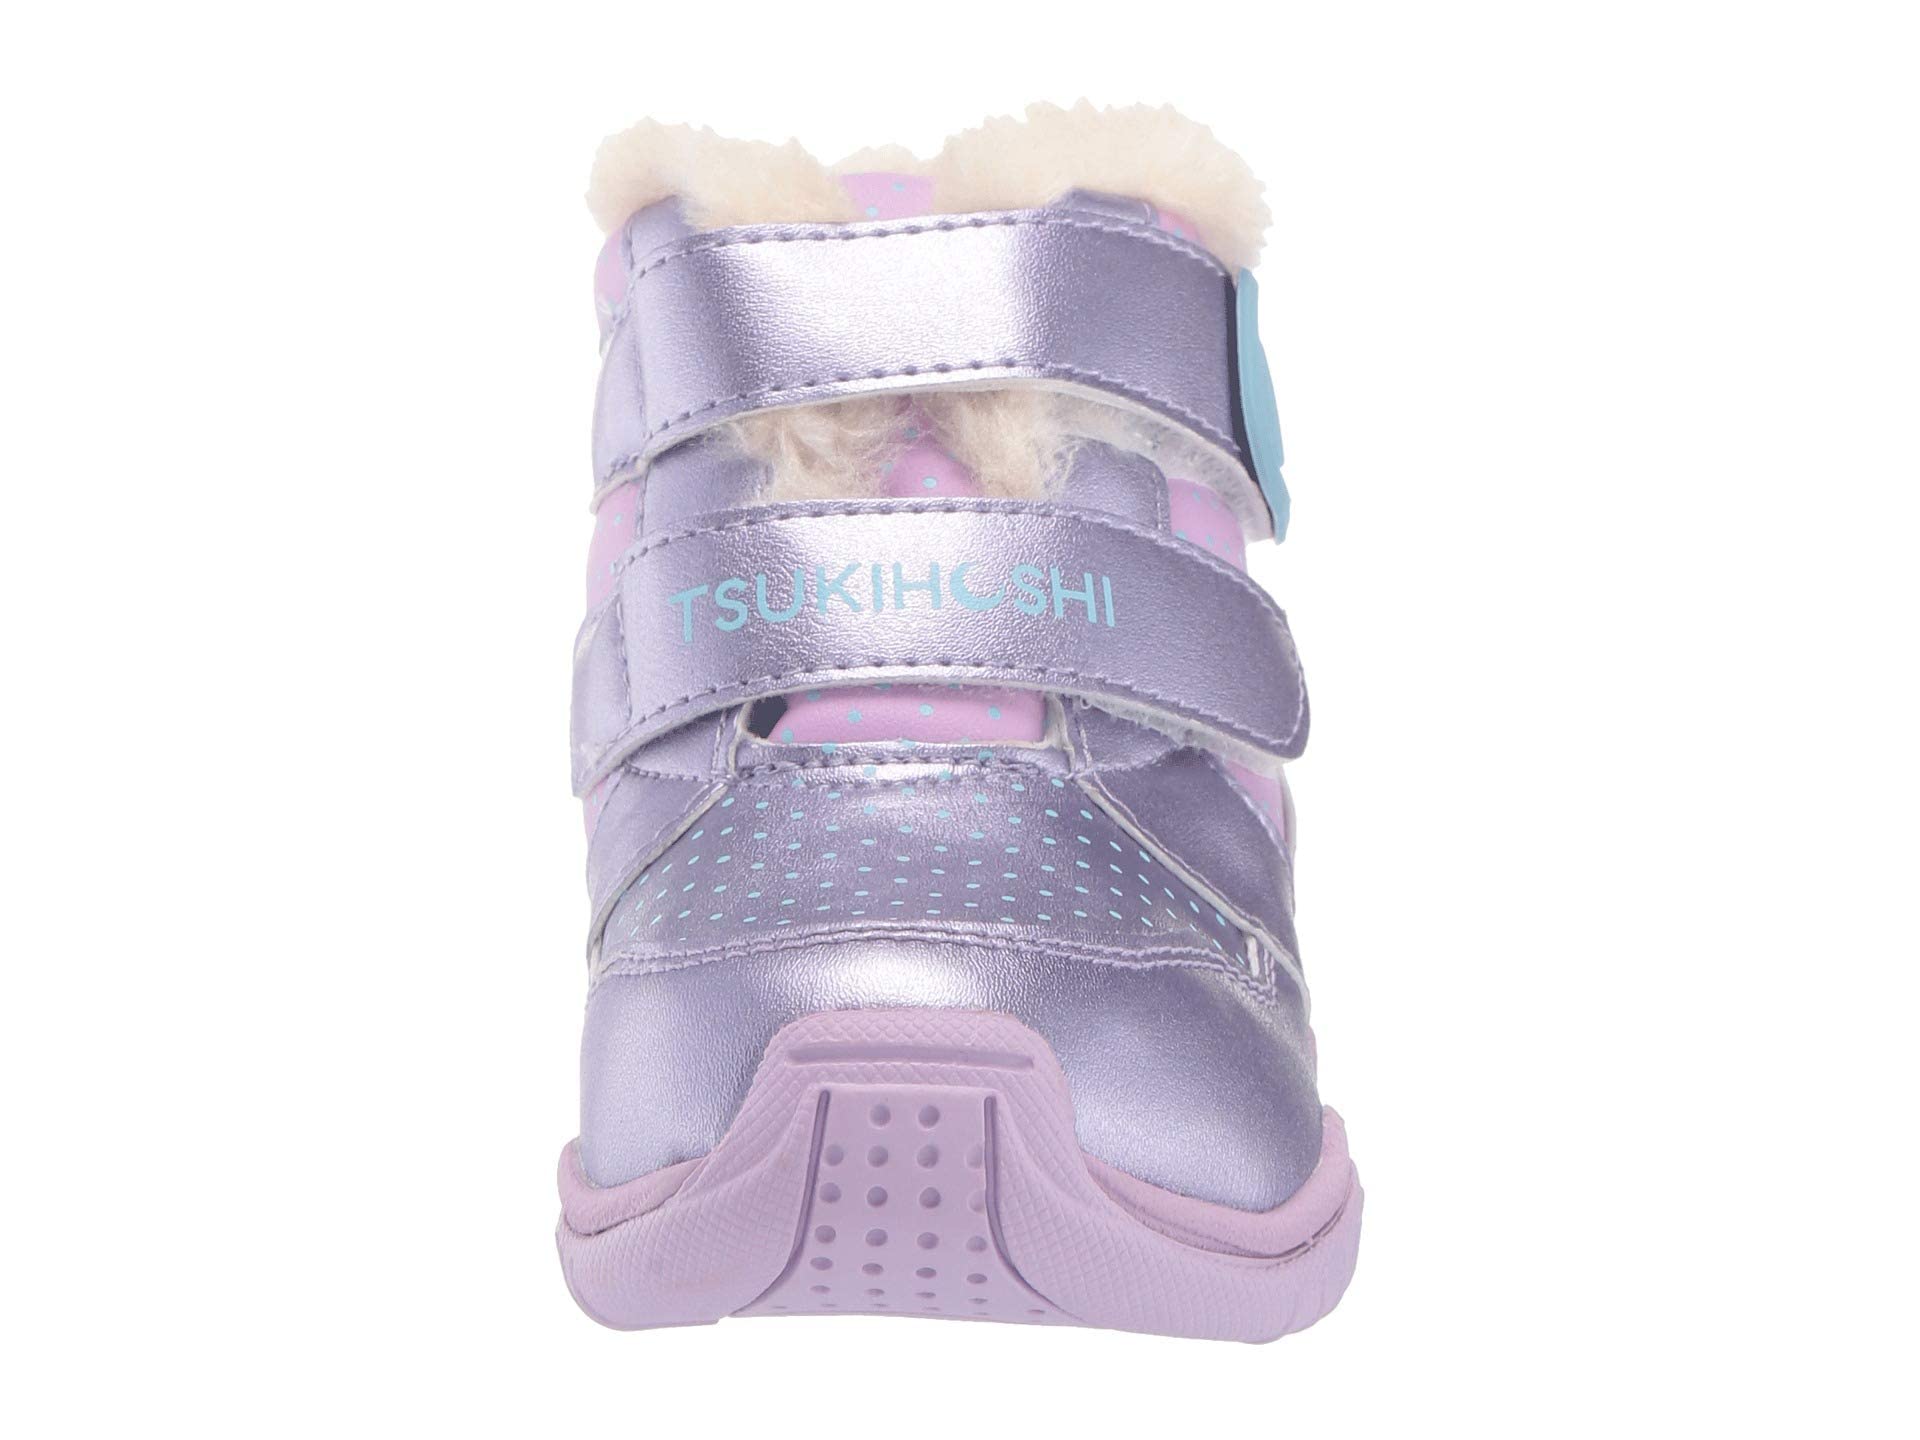 TSUKIHOSHI 7519 IGLOO Strap-Closure Machine-Washable Snow Boot with Wide Toe Box and Slip-Resistant, Non-Marking Outsole - For Toddlers and Little Kids, Ages 1-8